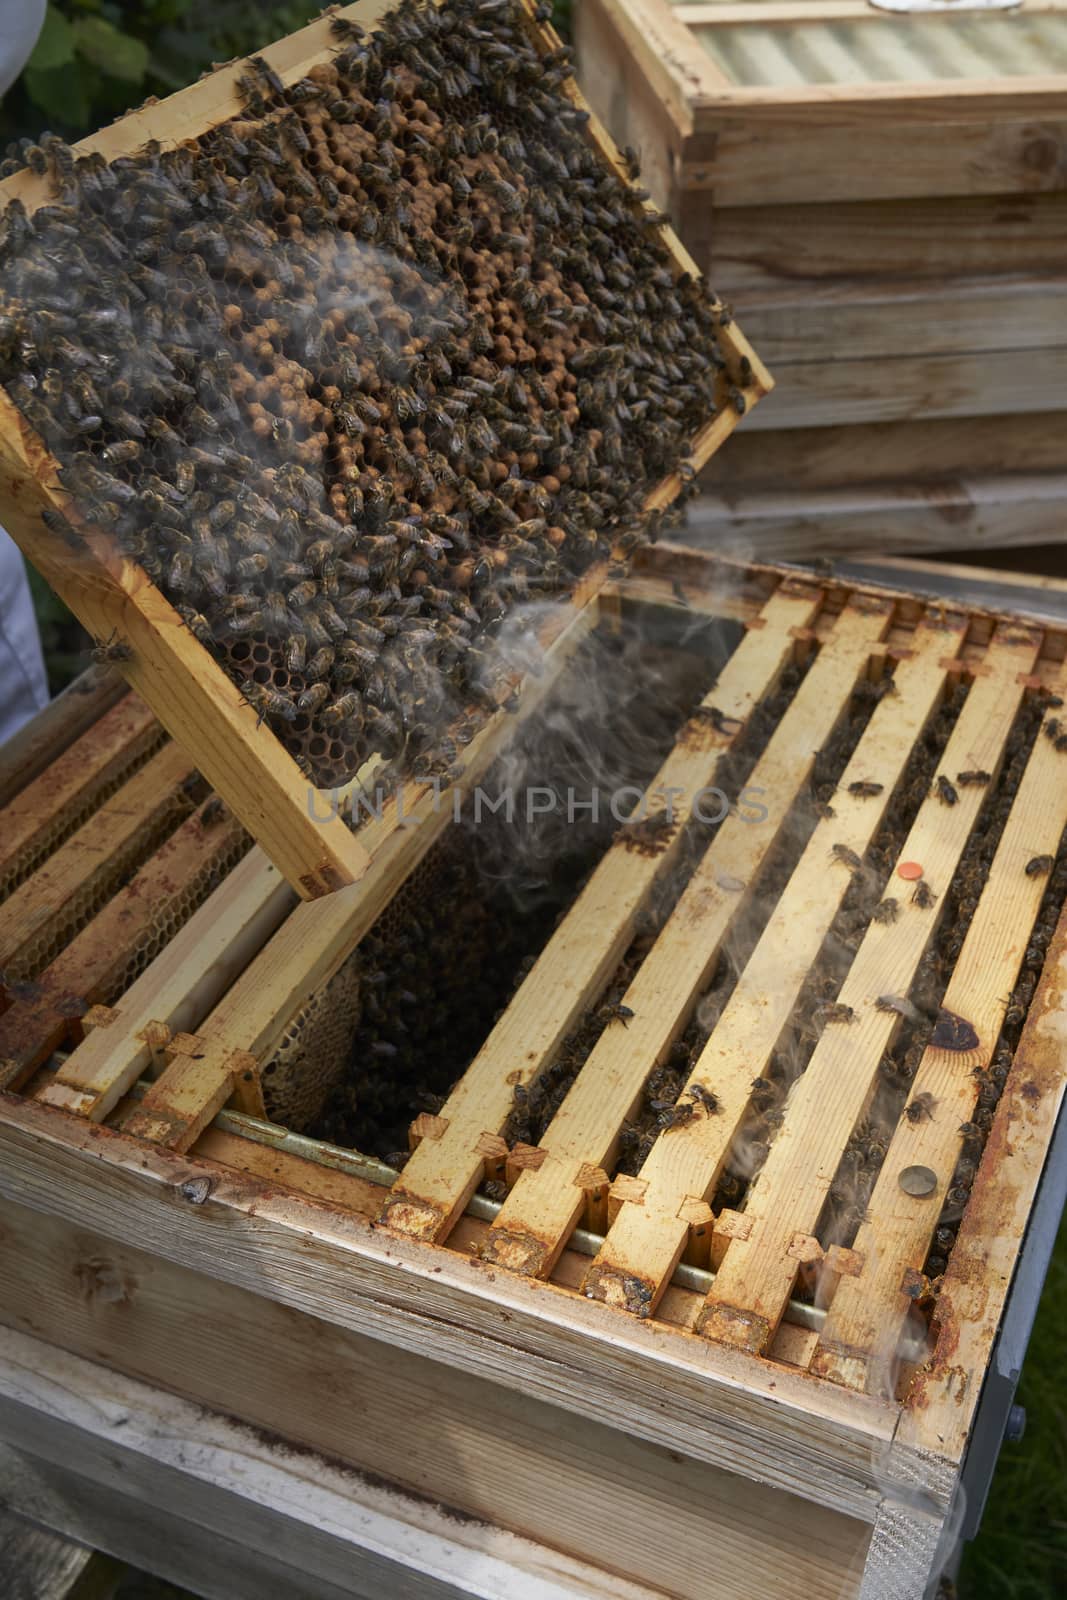 Beekeeper inspecting a frame of honey from hive